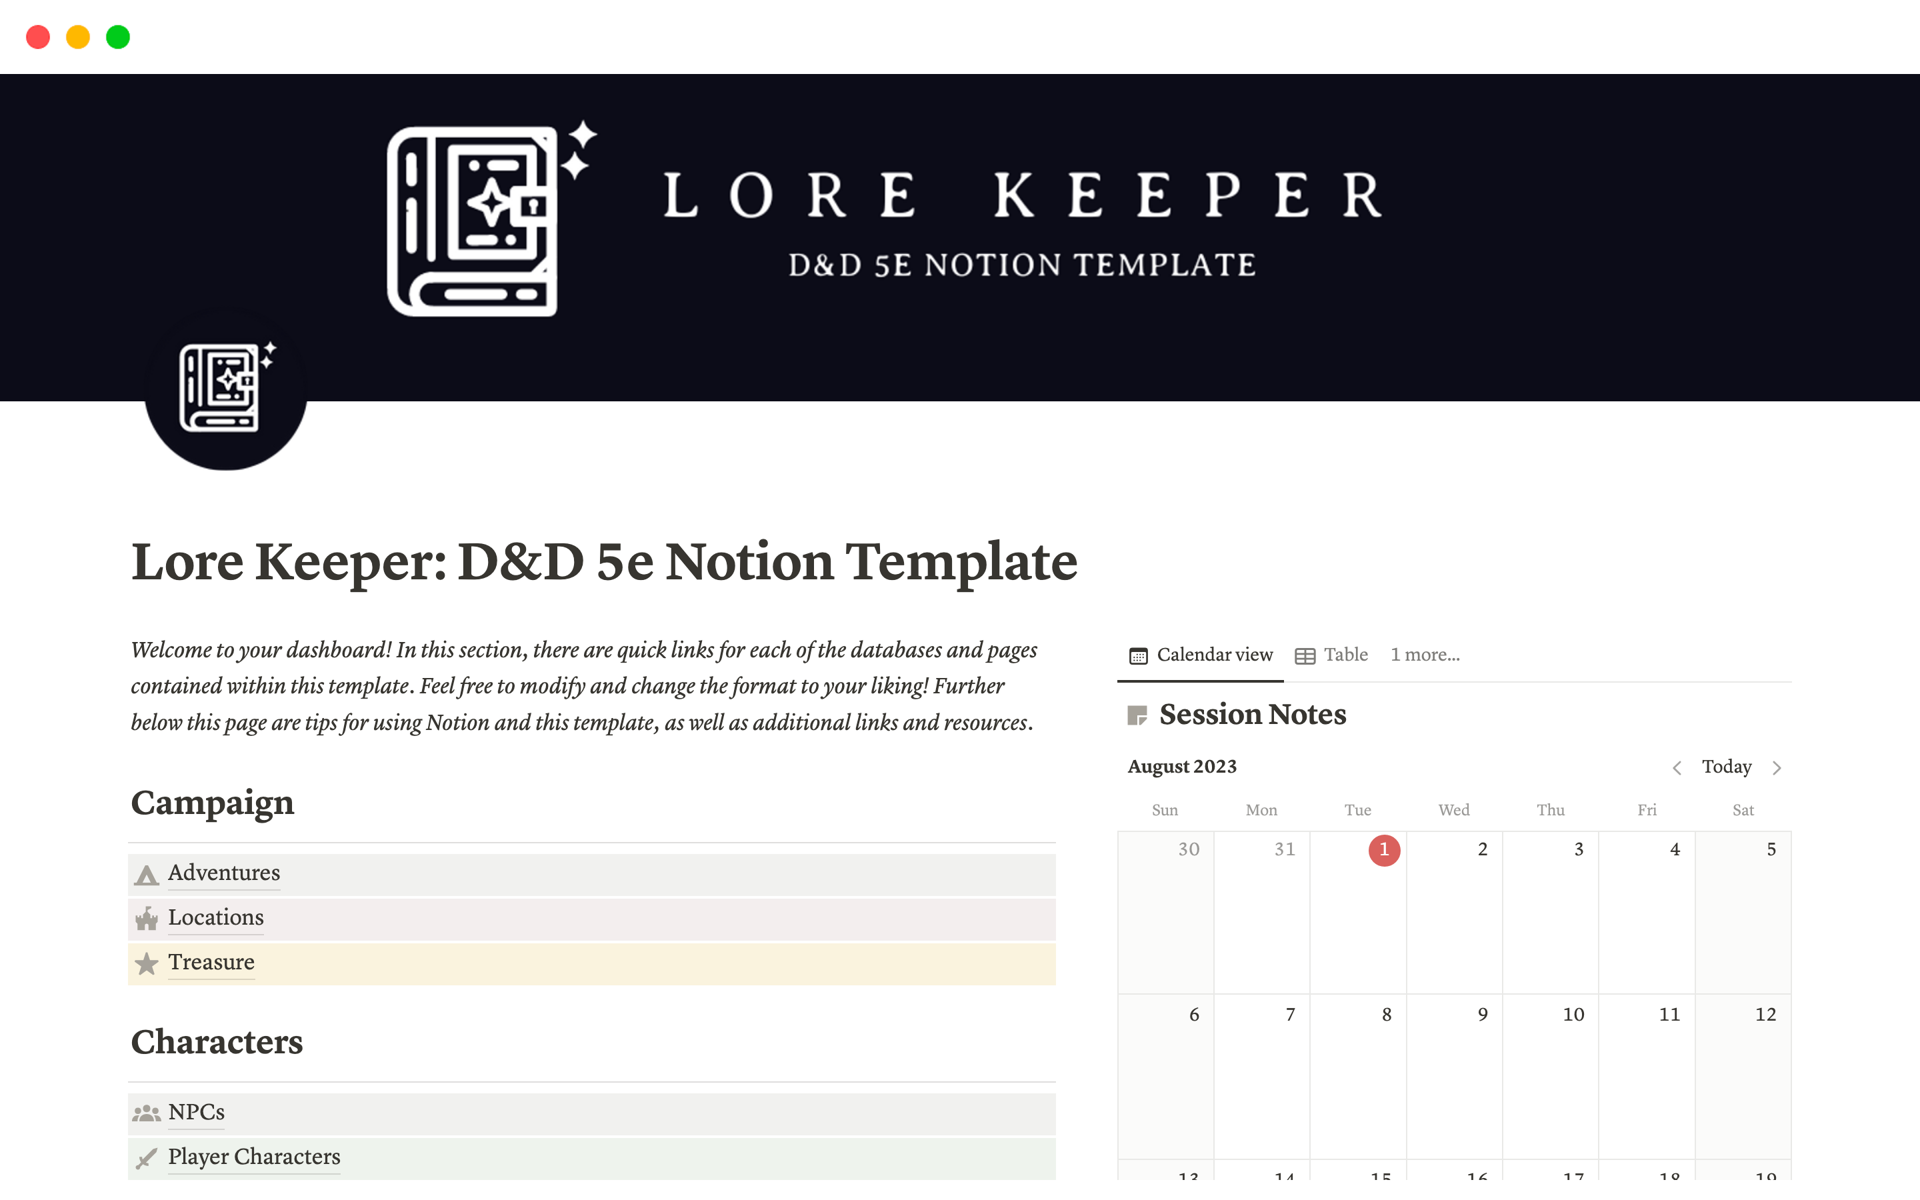 In Lore Keeper 5e, you'll find everything you need to plan your own TTRPG adventures quickly and methodically as a Dungeon Master. Primarily designed for Dungeons and Dragons, this template has linked databases for adventures, treasure, NPCs, locations, and much more.